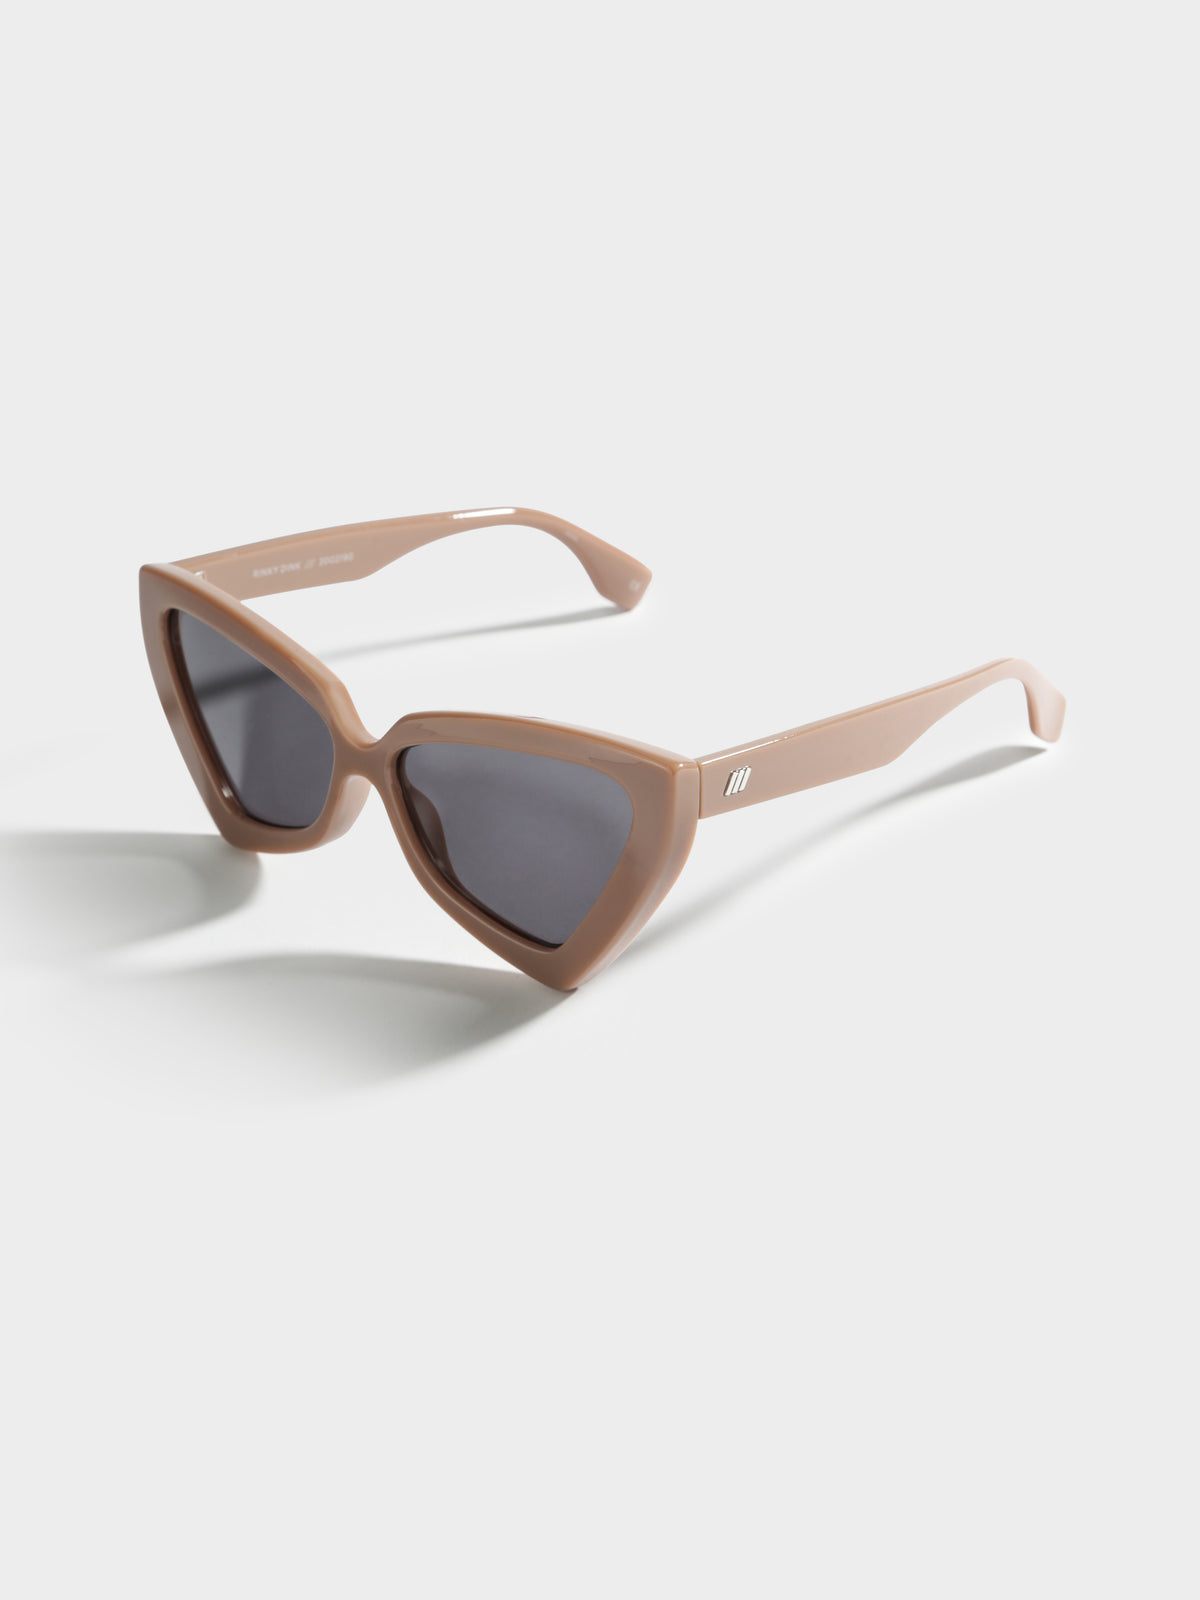 Rinky Dink Sunglasses in Stone